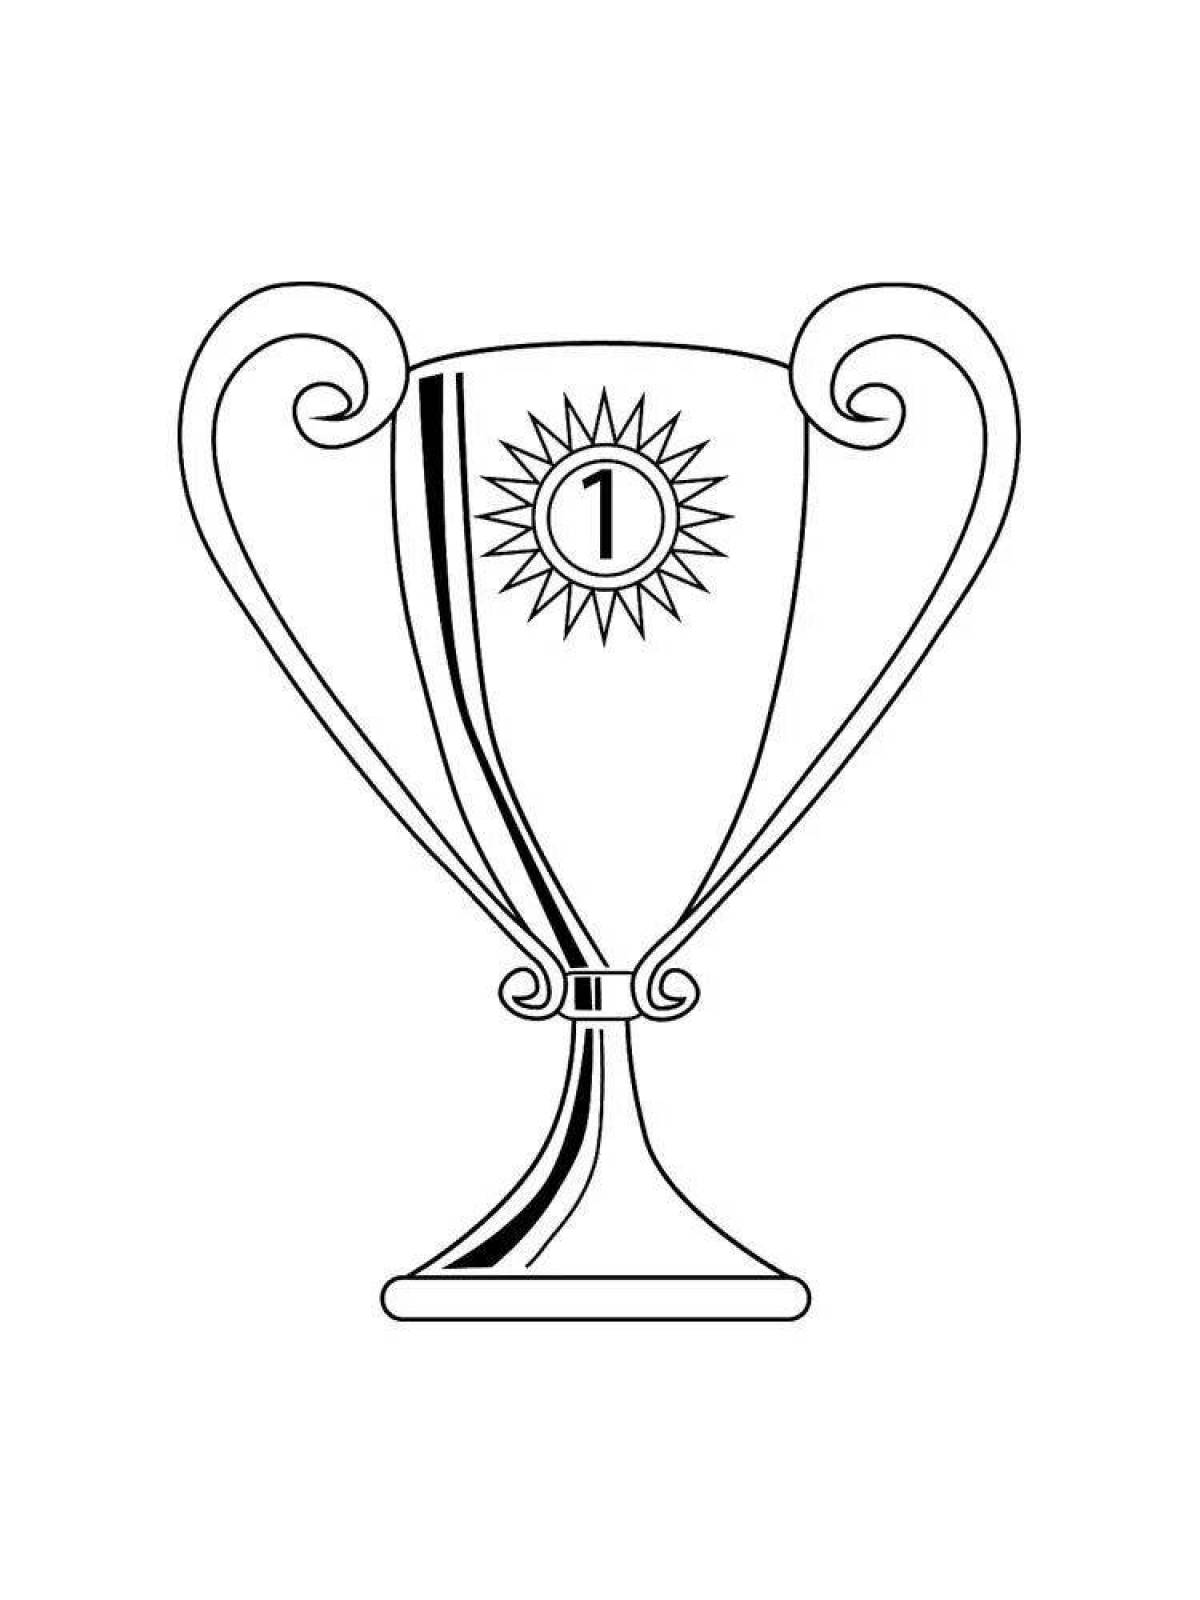 Coloring page winner's cup